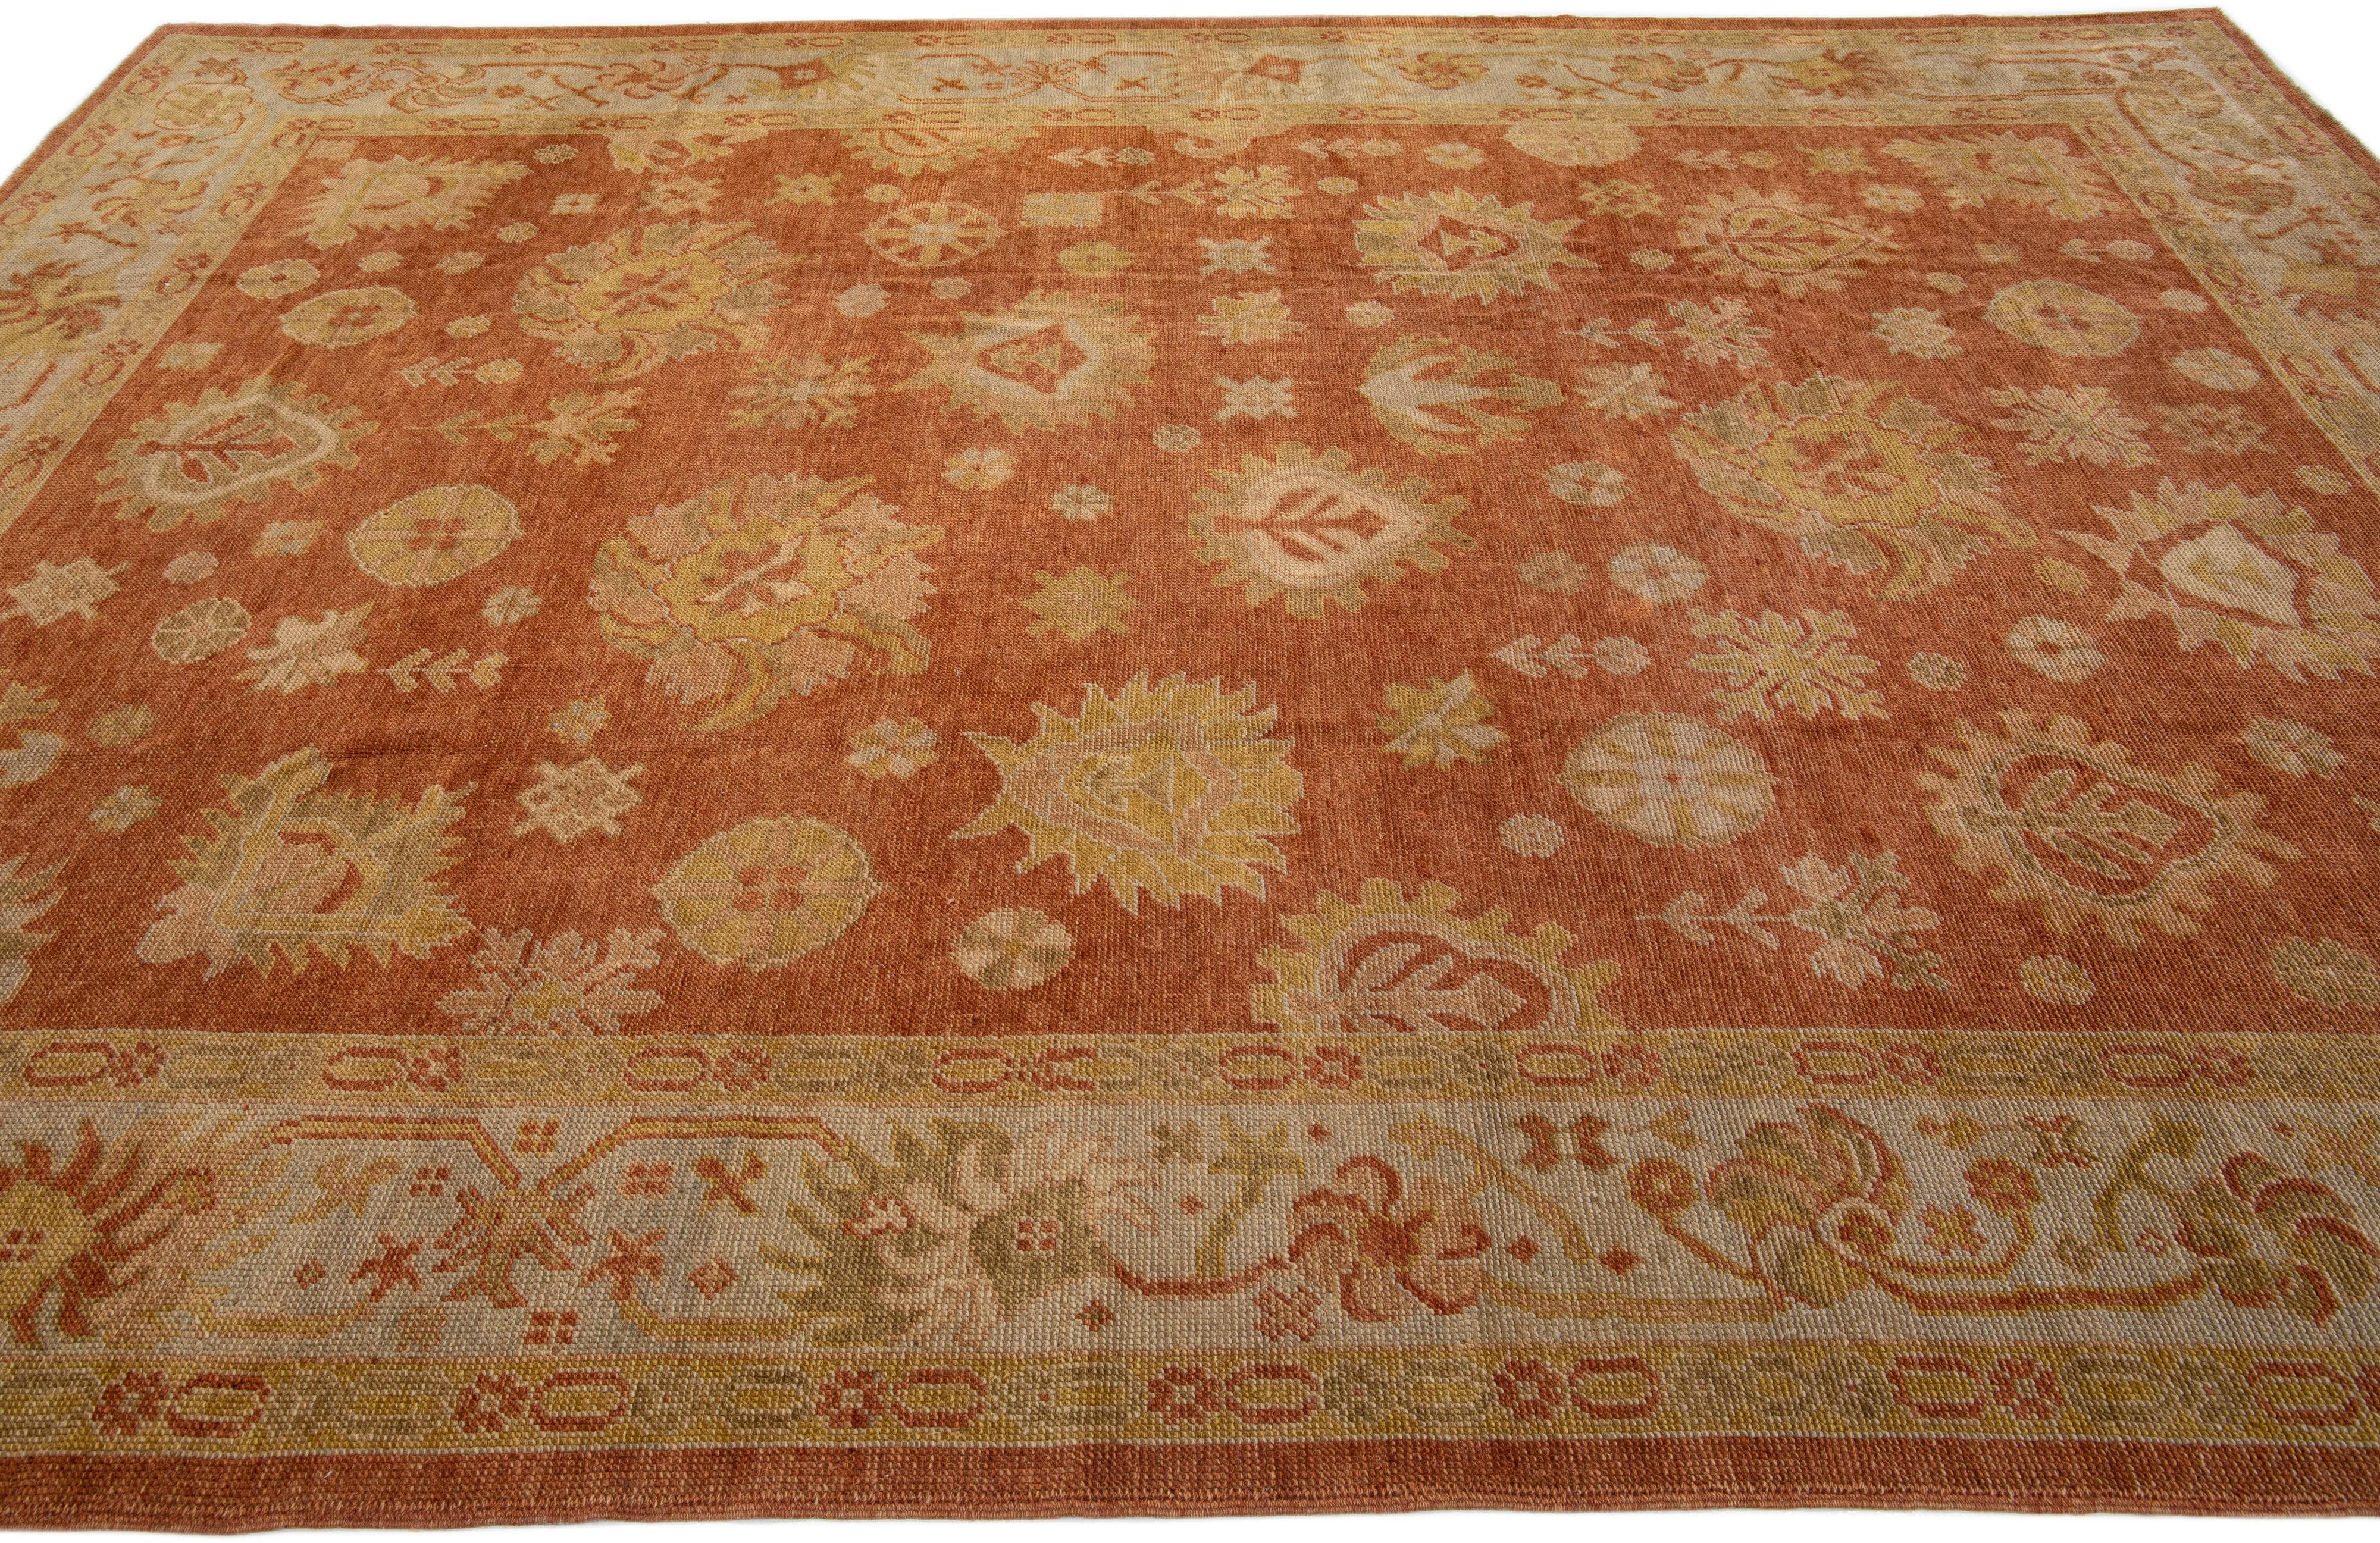 Floral Modern Turkish Oushak Handmade Wool Rug with Copper Color Field In New Condition For Sale In Norwalk, CT